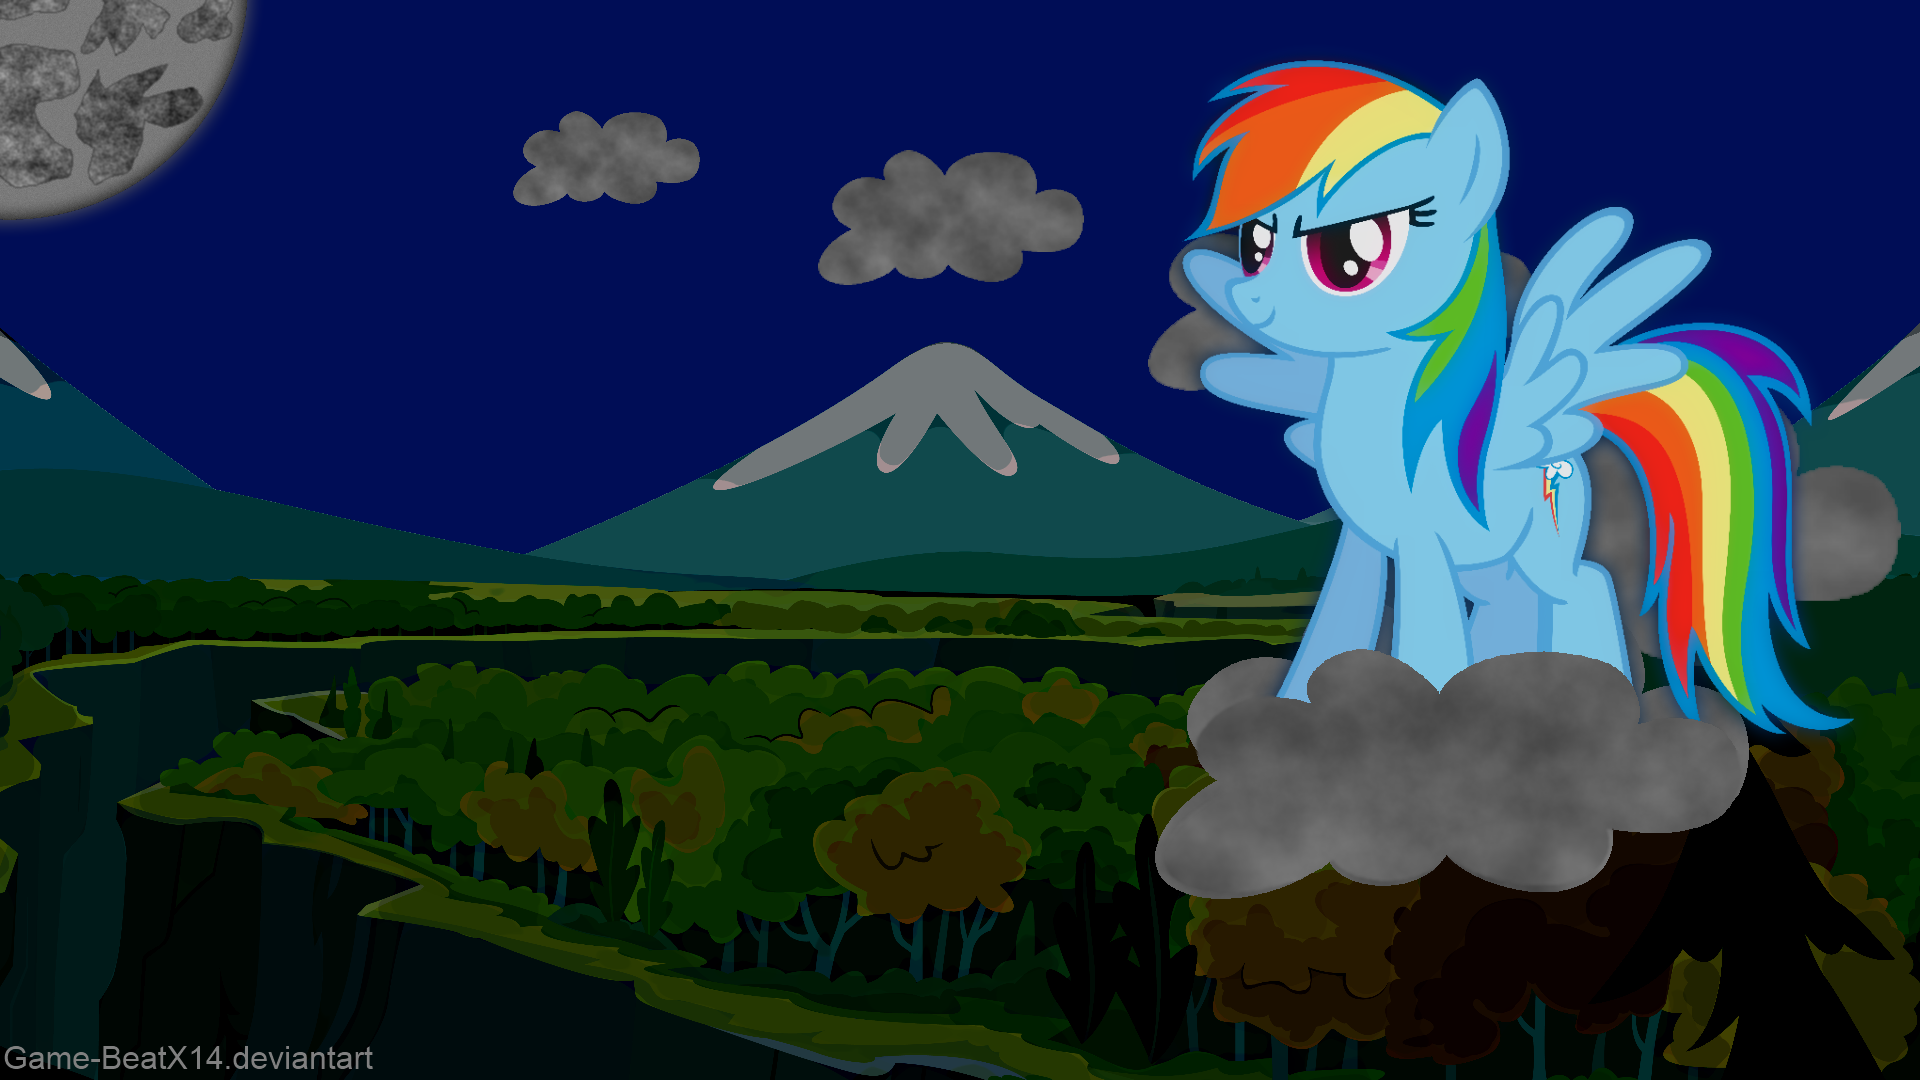 Rainbow Dash Wallpaper - Above Ghastly Gorge by Game-BeatX14, MoongazePonies and Quanno3